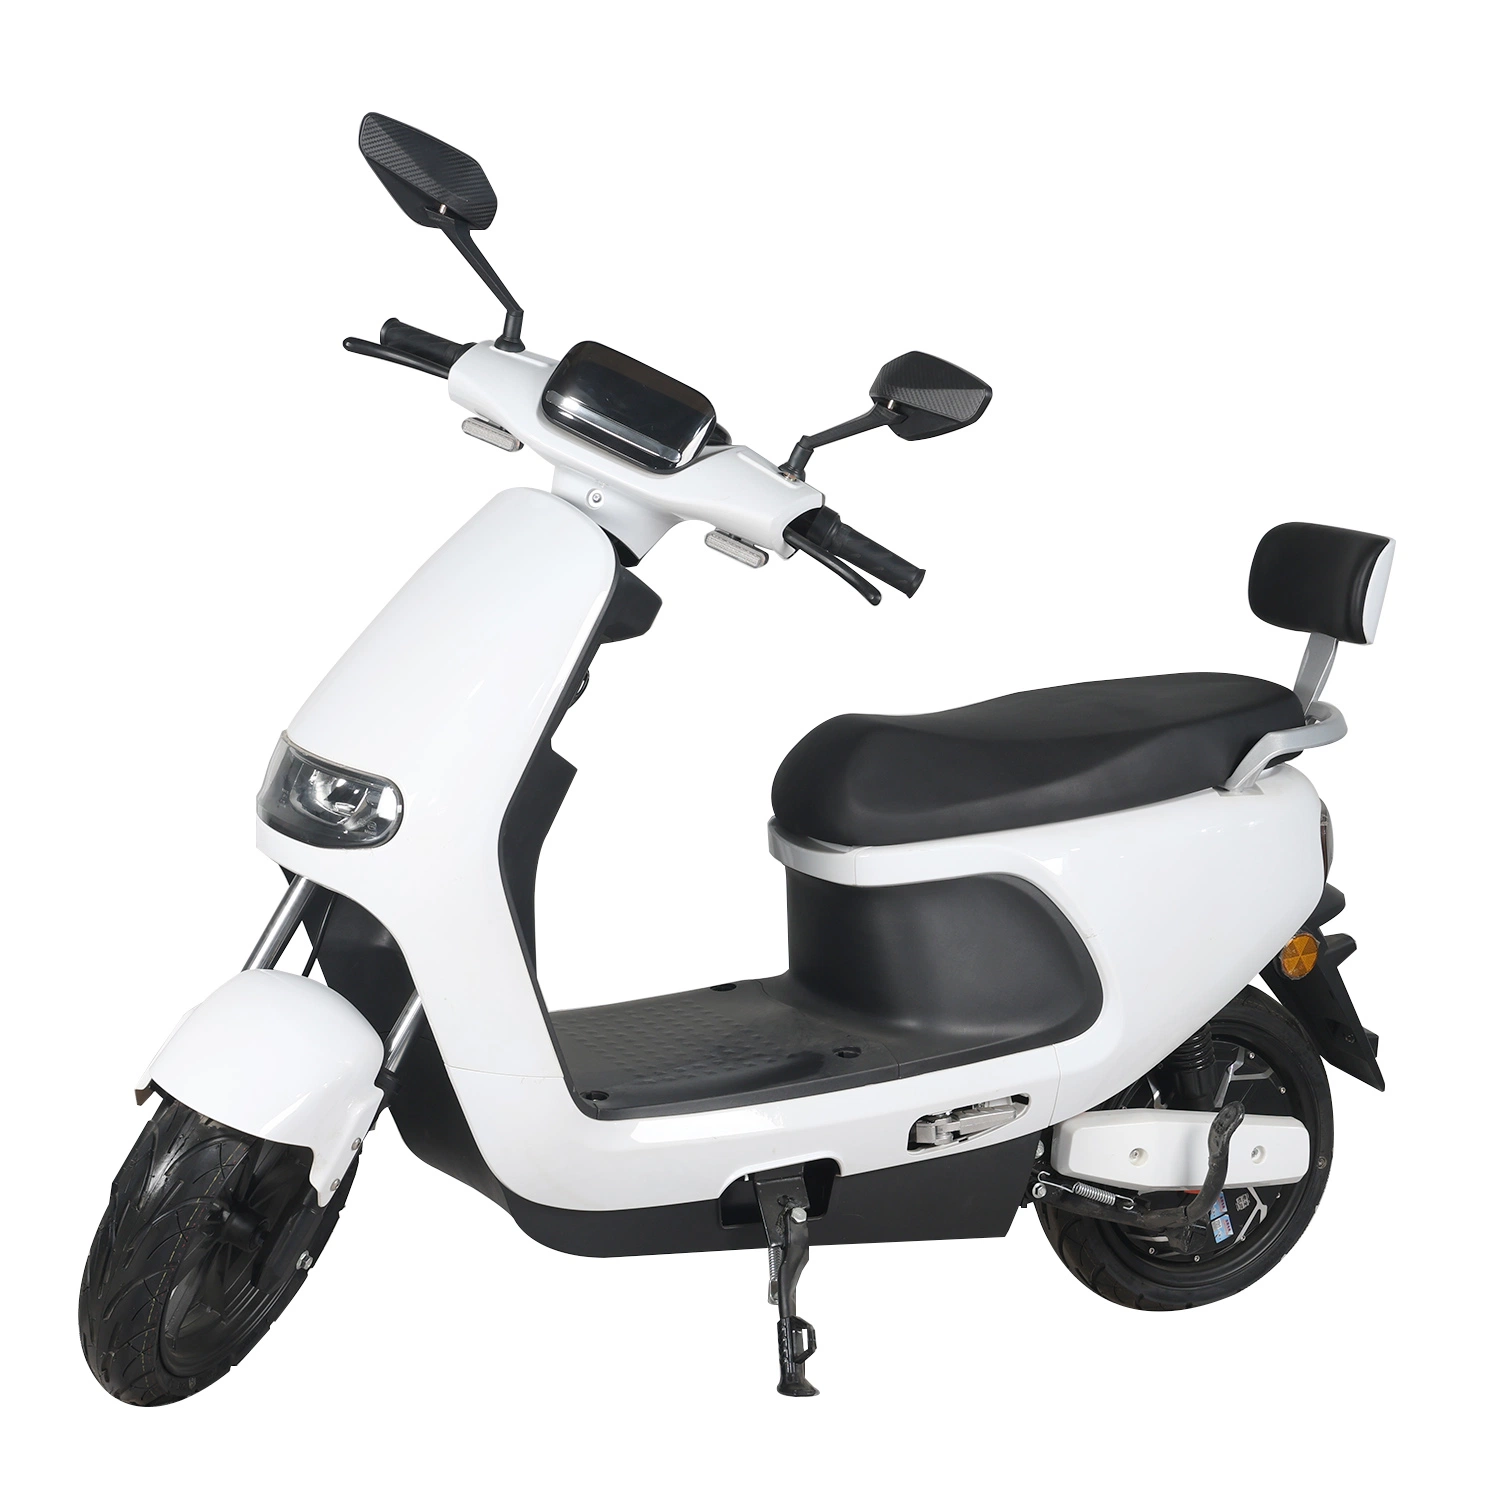 1000W Electric Motorcycle Best-Seller with Portable Lithium Battery Sport Moped E-Scooter for Adult